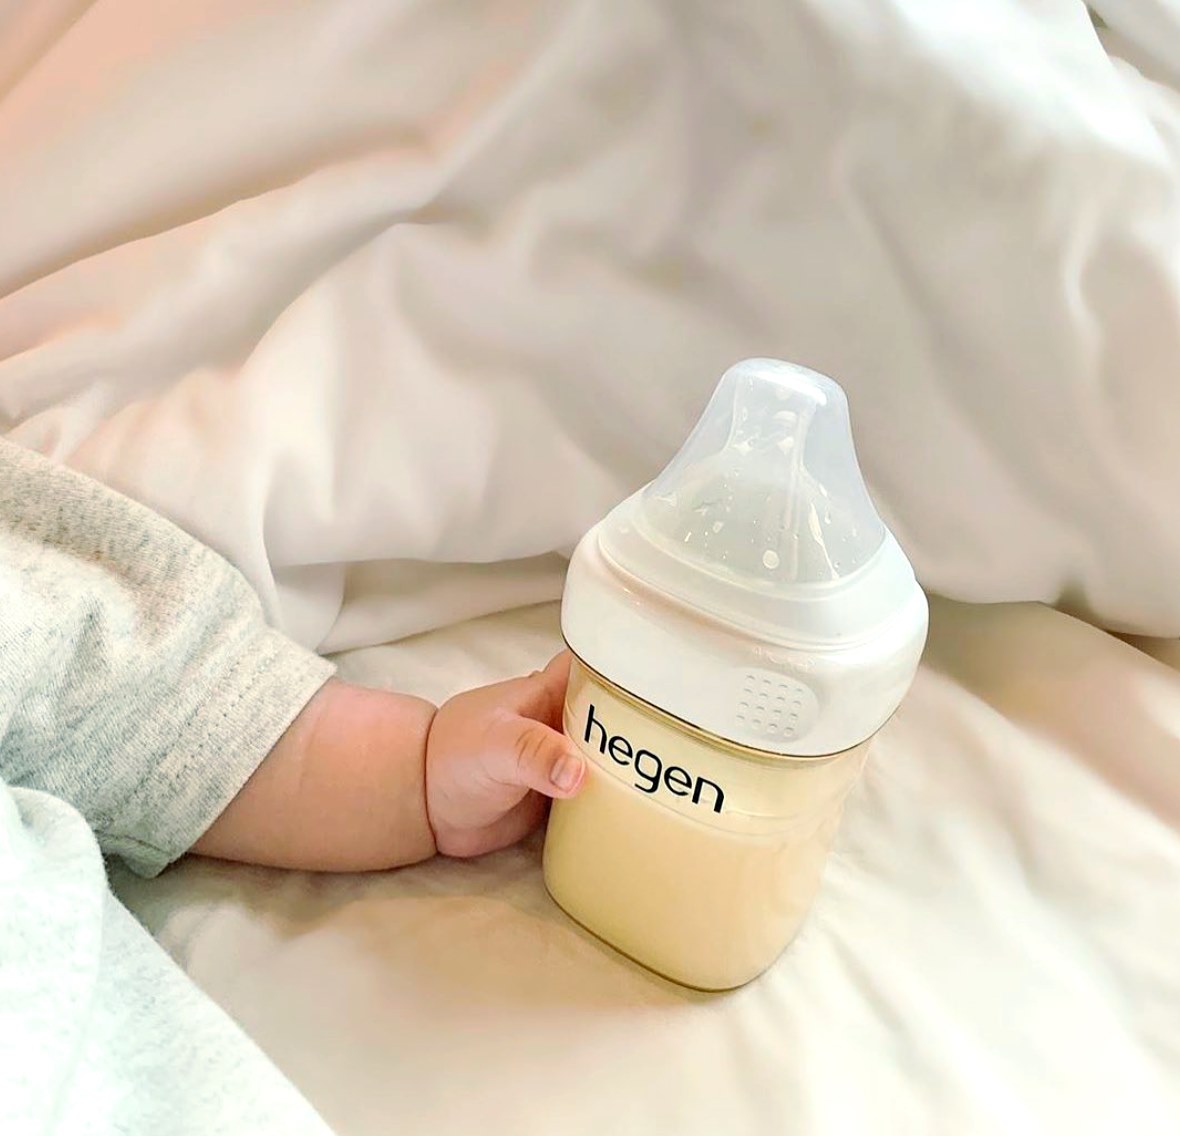 Ever wondered why our bottles come in their unique 'soft-square' #SqRound shape? ⁠
⁠
Our SqRound shaped bottles are ergonomically shaped for babies' tiny hands to hold the bottles! ⁠
⁠
📸 @hegen.taiwan

l8r.it/fnwa

#hegenuk #morethanjustabottle #baby #babybottles